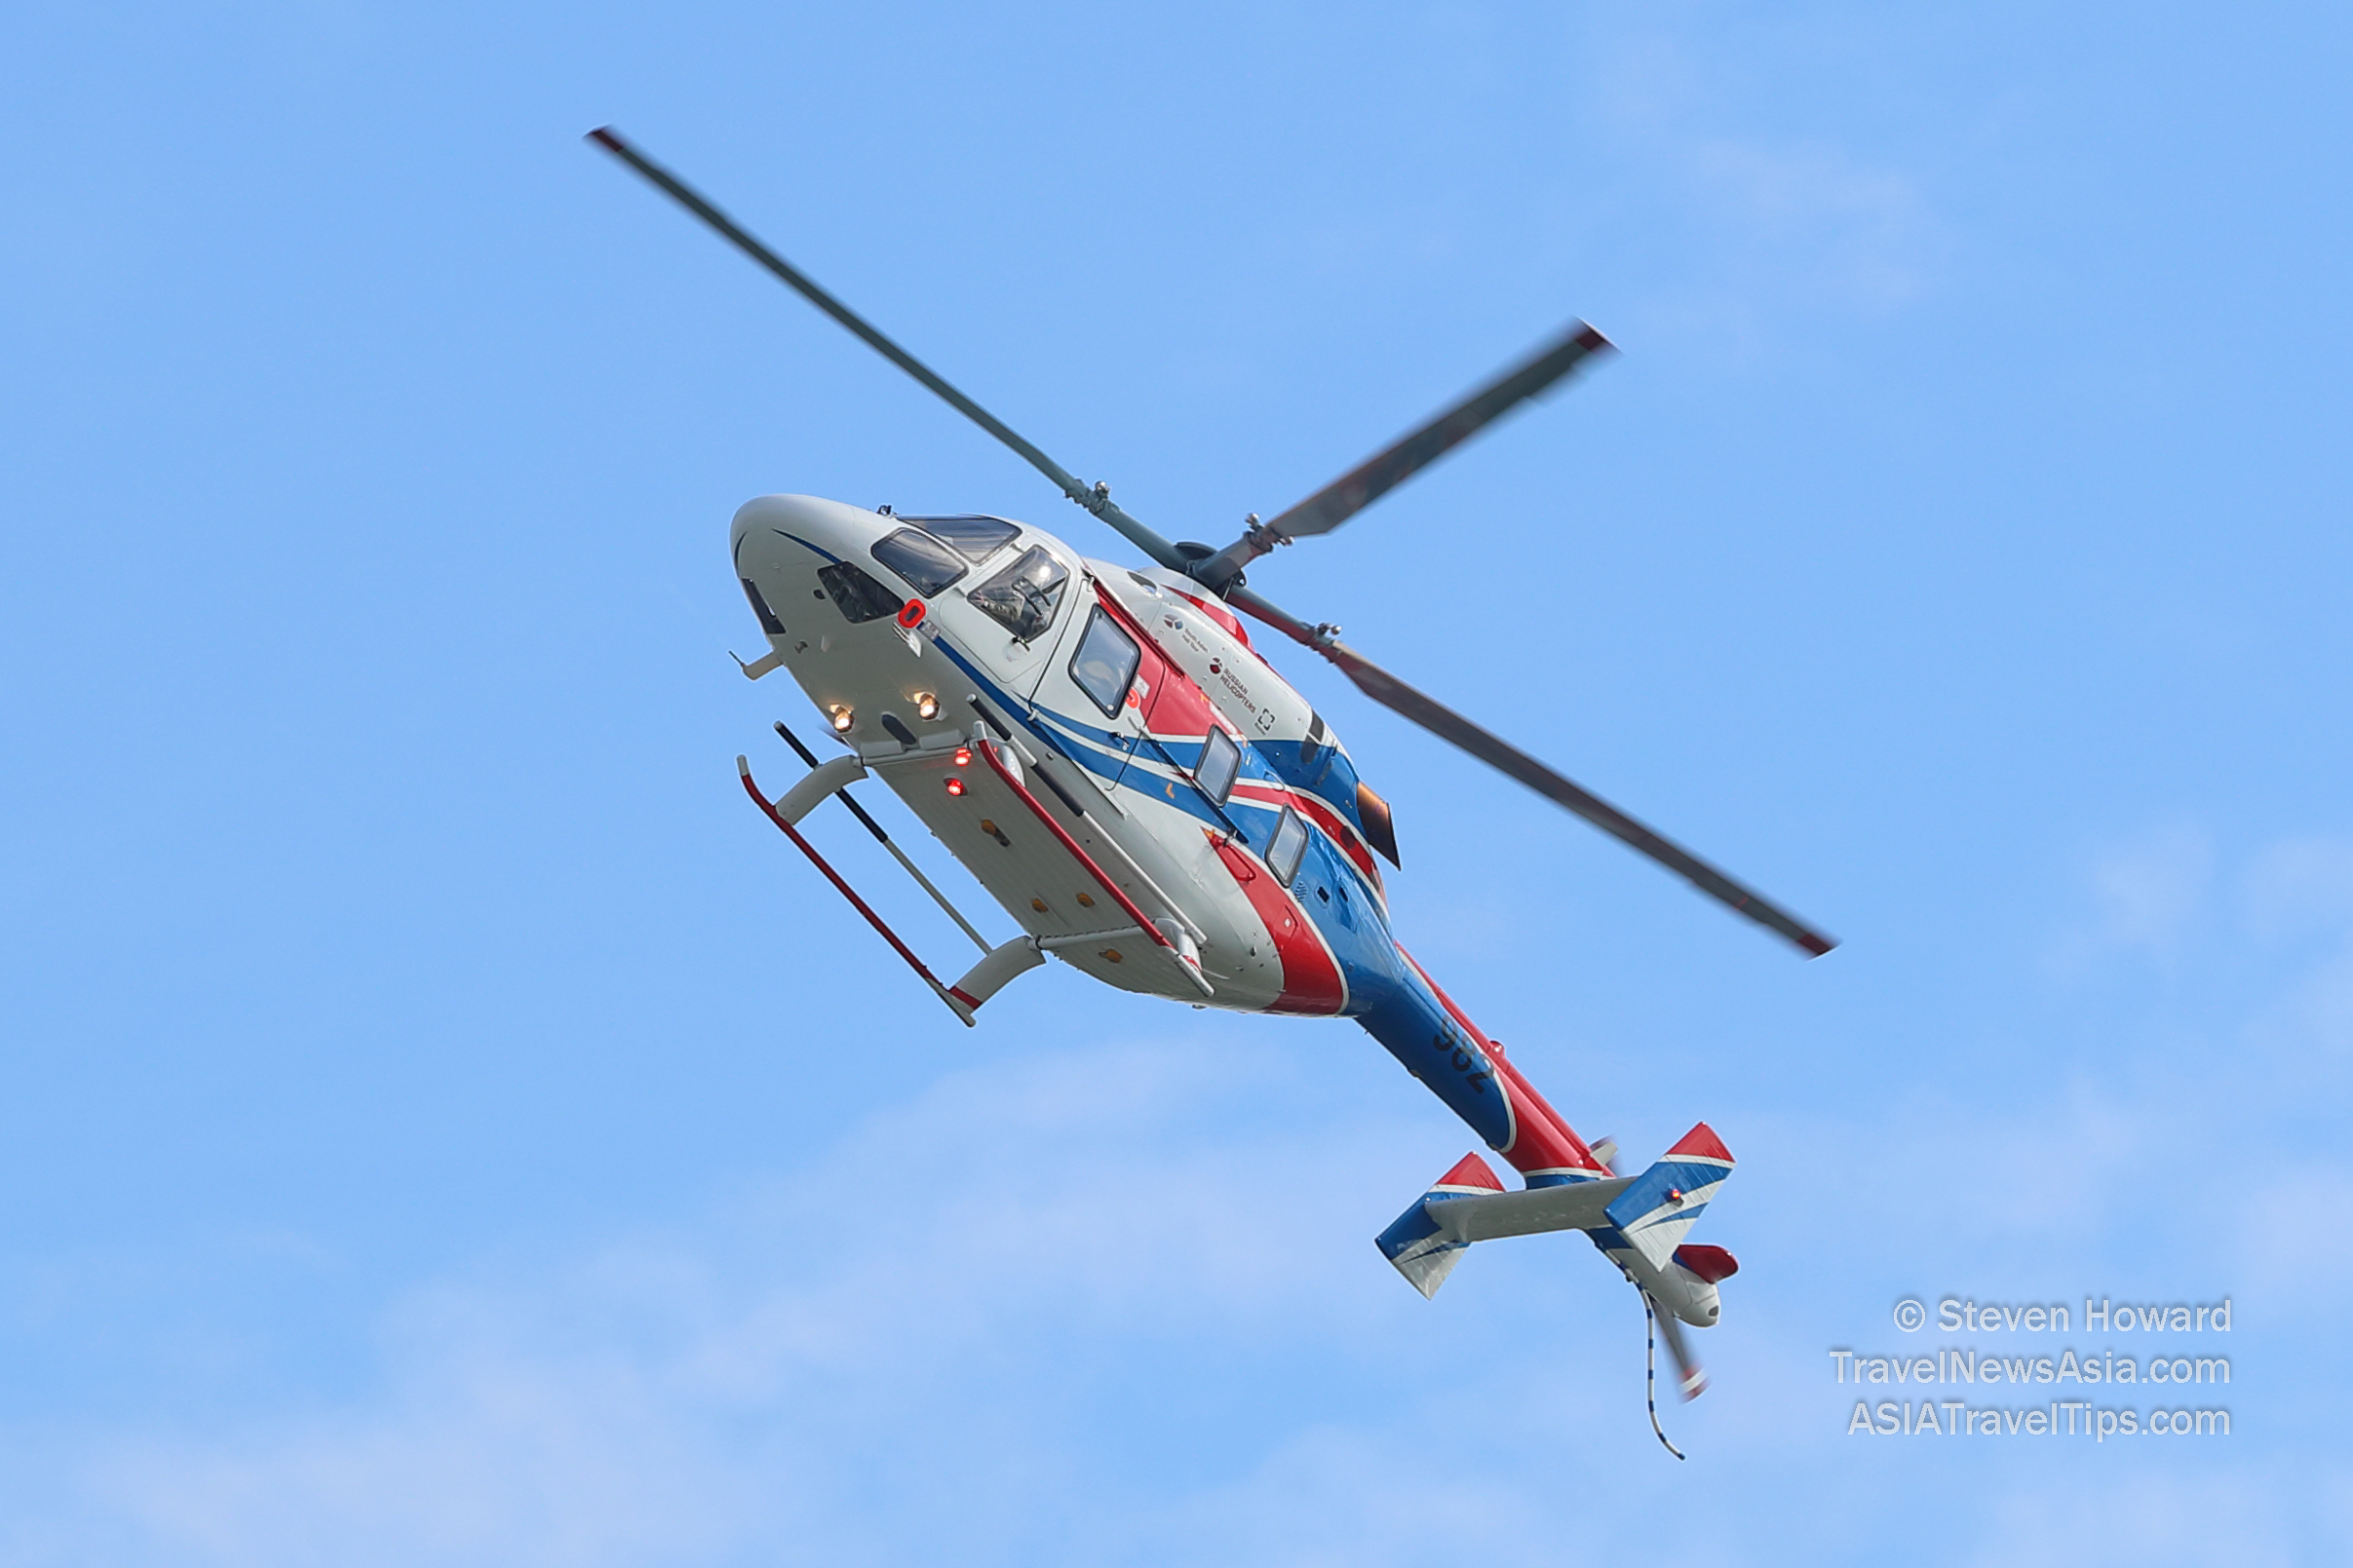 The versatile Ansat Helicopter performing in Malaysia. Picture by Steven Howard of TravelNewsAsia.com Click to enlarge.